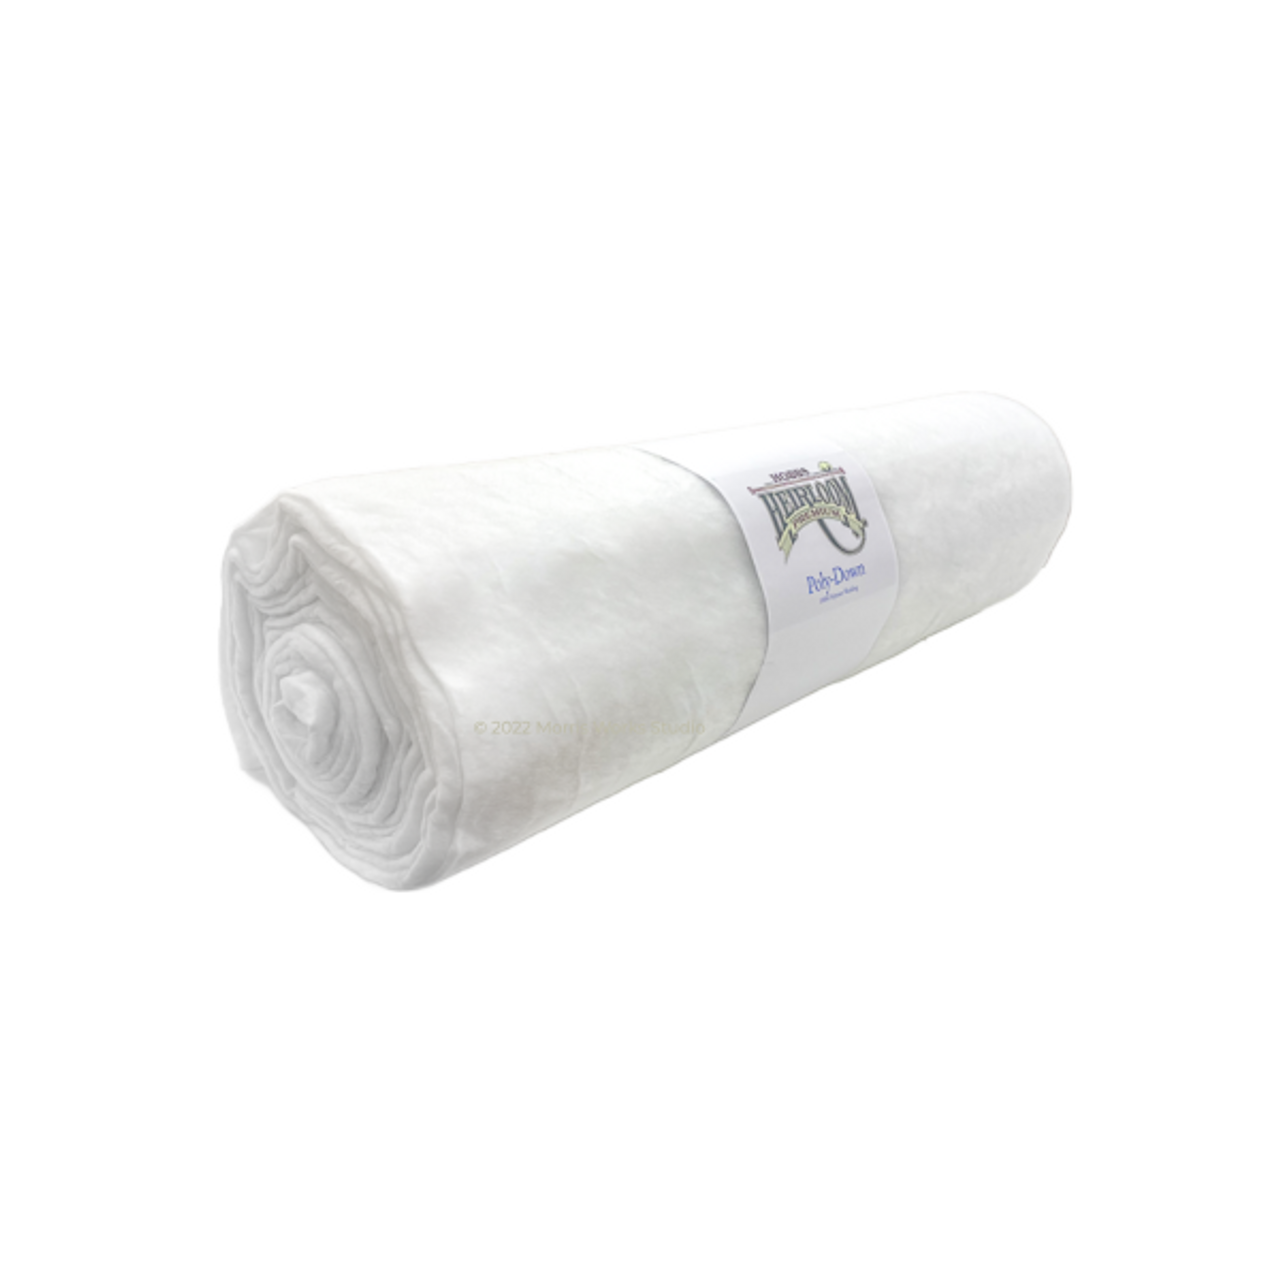 Hobbs Poly-Down quilt wadding  7.5 metre roll